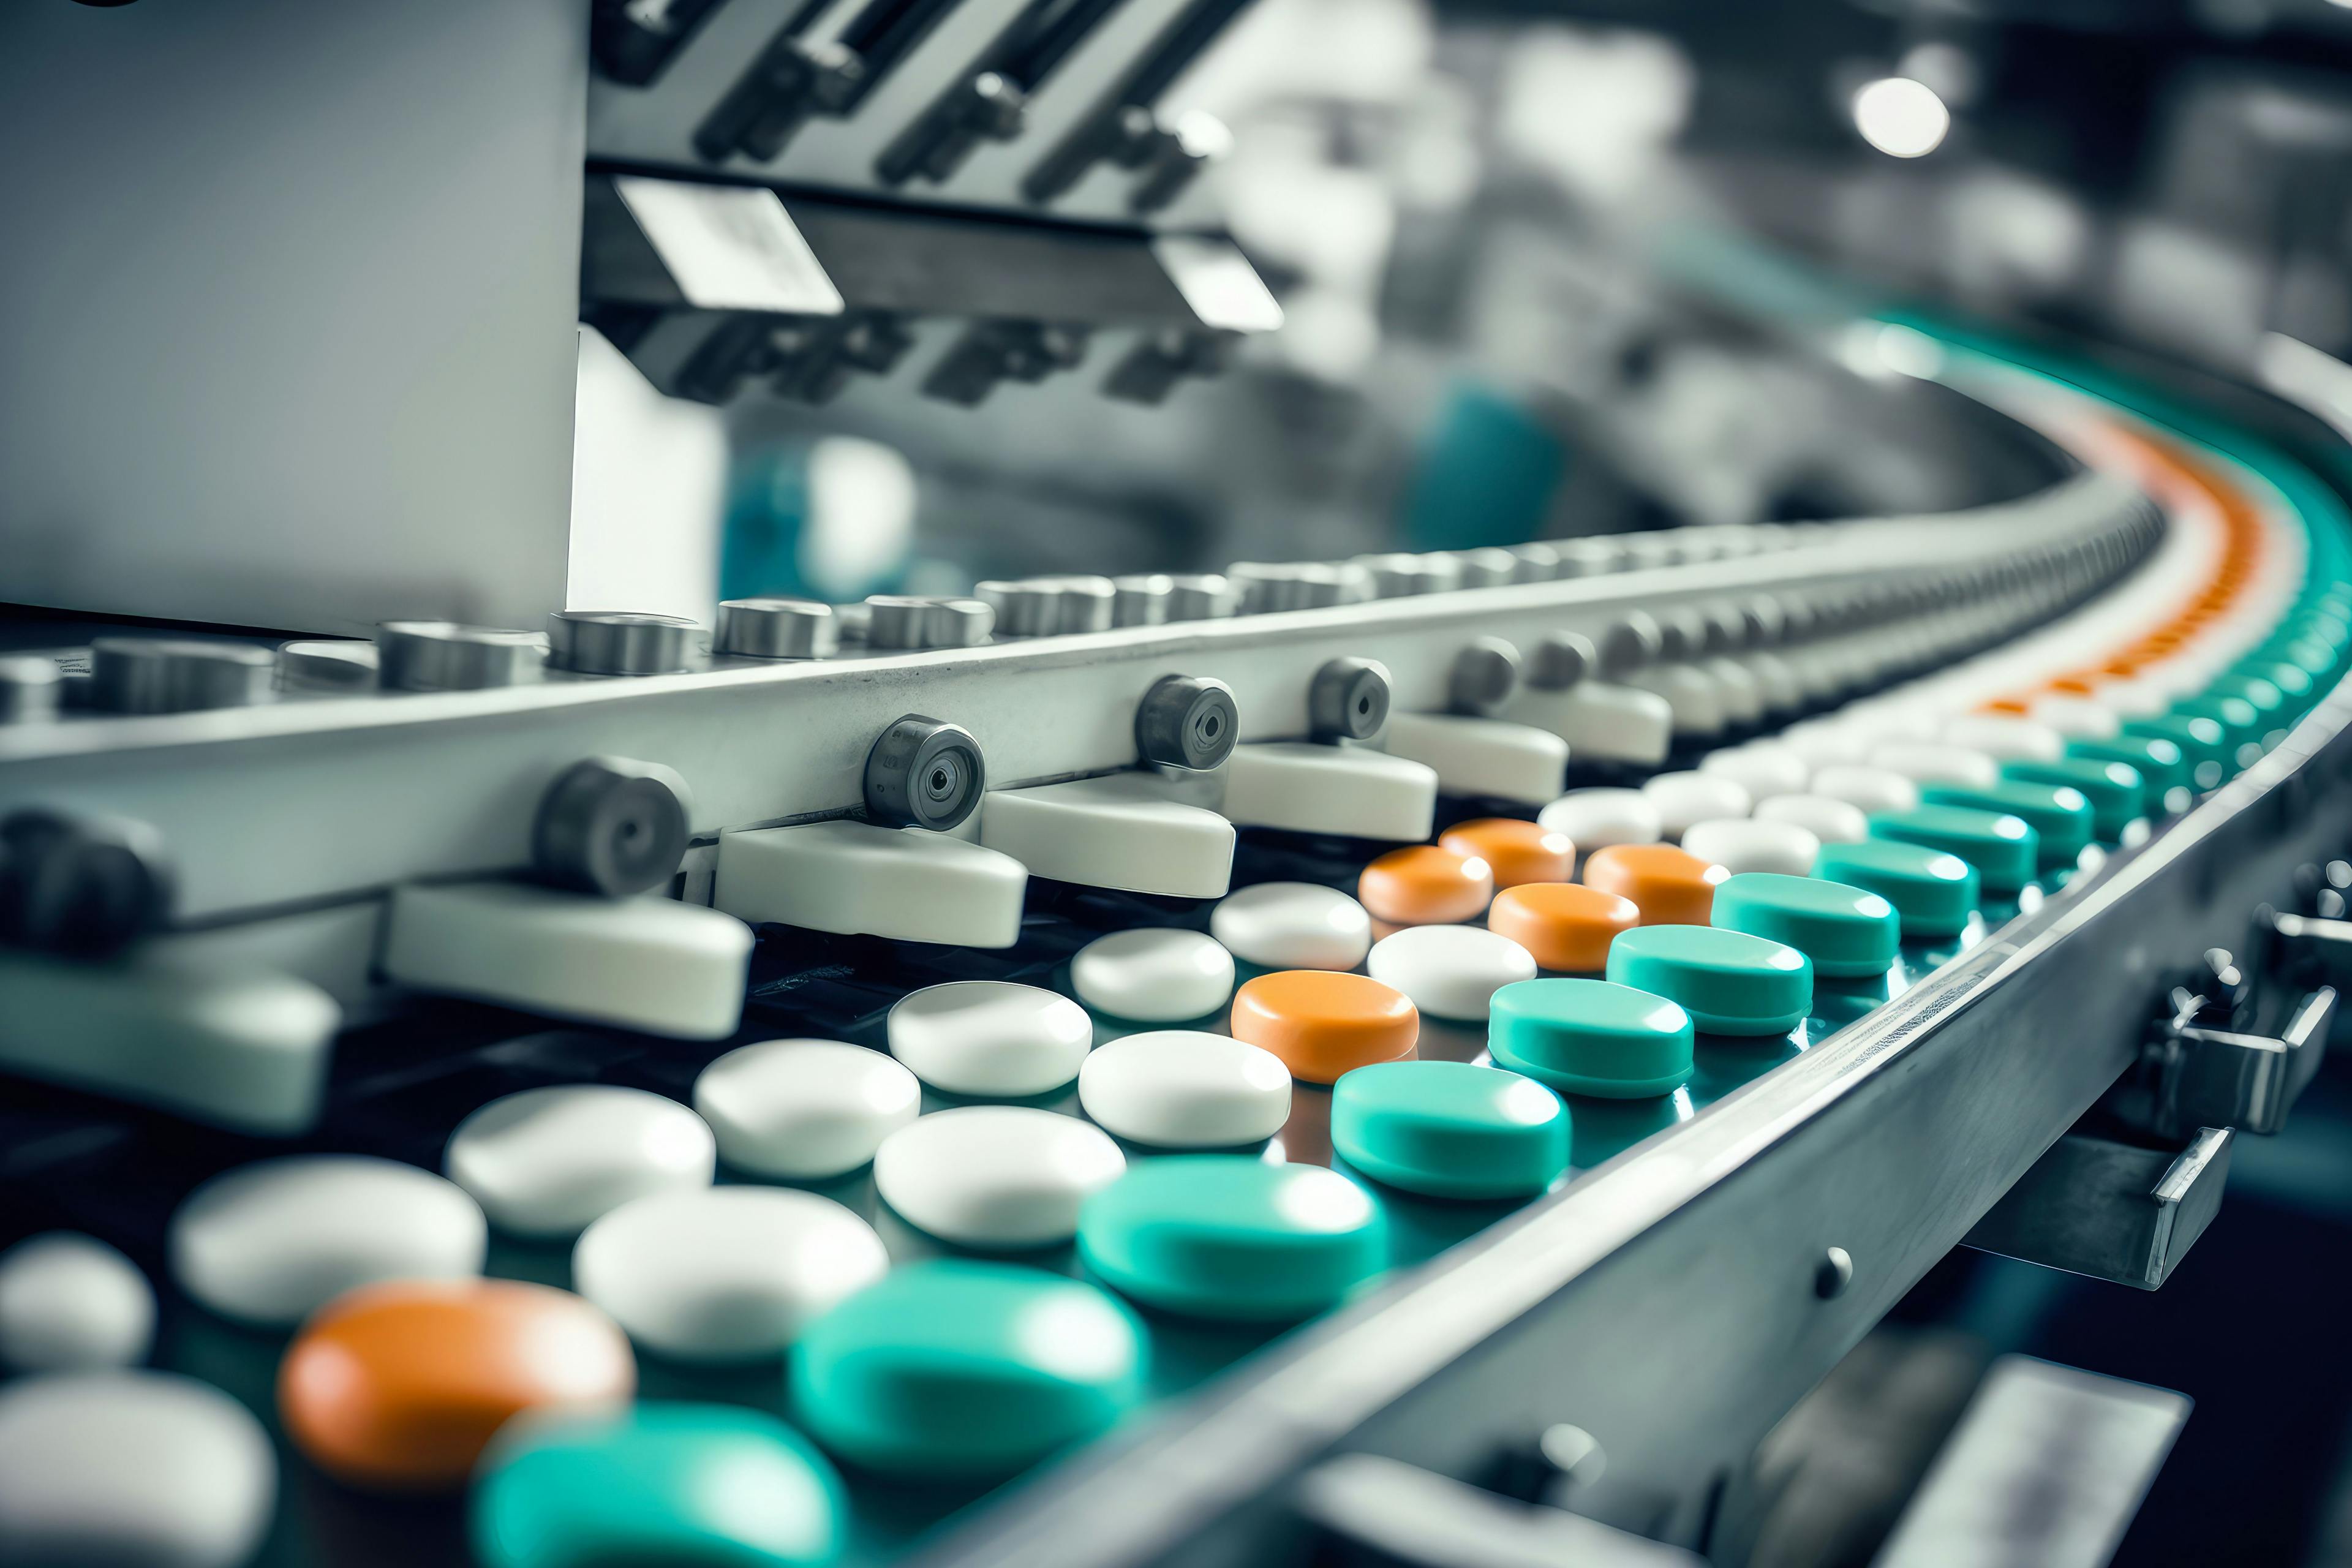 Pharmaceutical Industry's State-of-the-Art Factory with Pills on Conveyor, © aicandy - stock.adobe.com